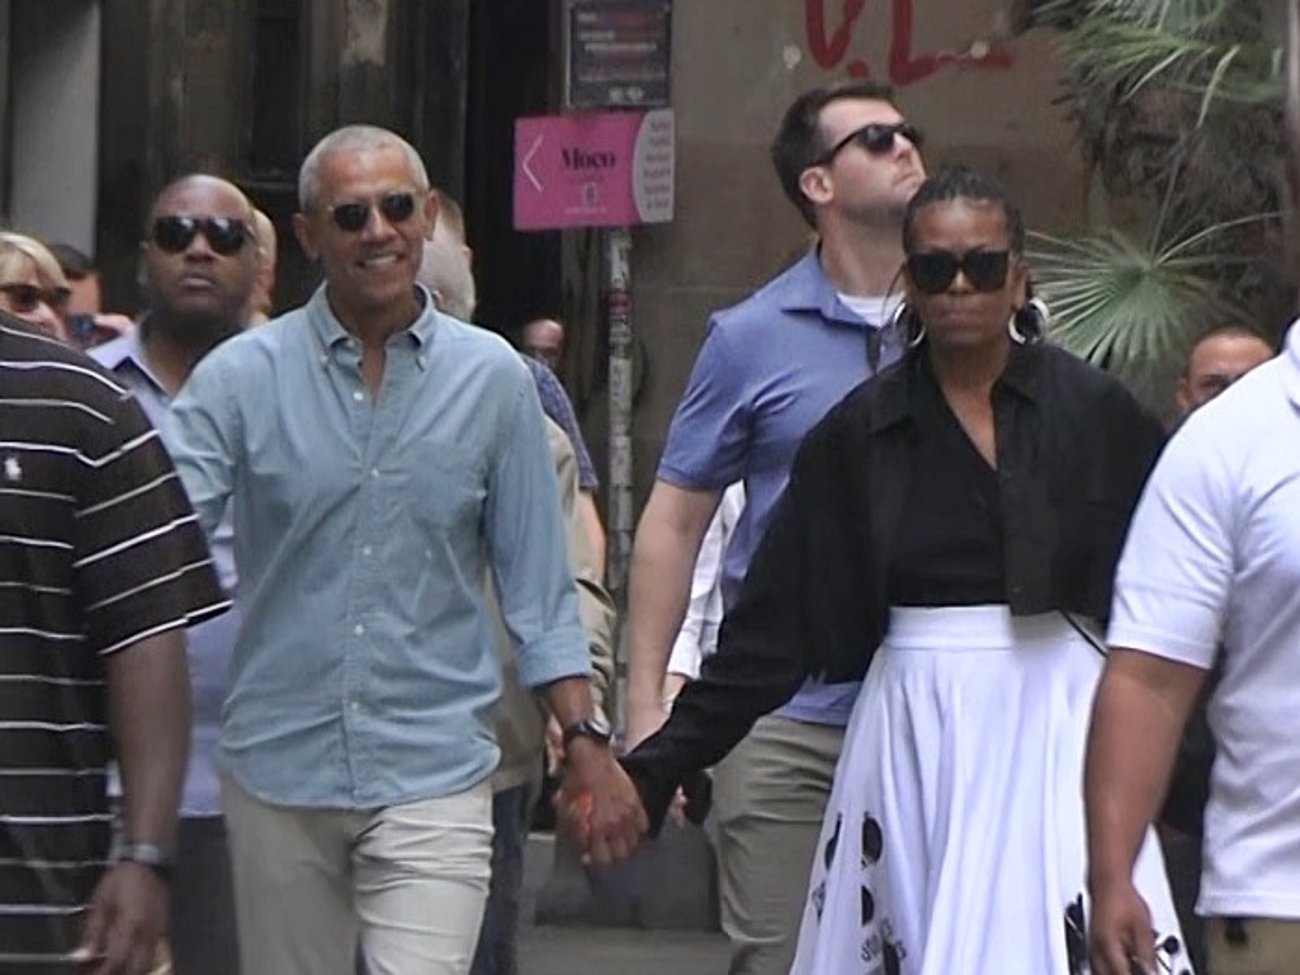 Between streets and smiles: The Obamas walk their love in Barcelona